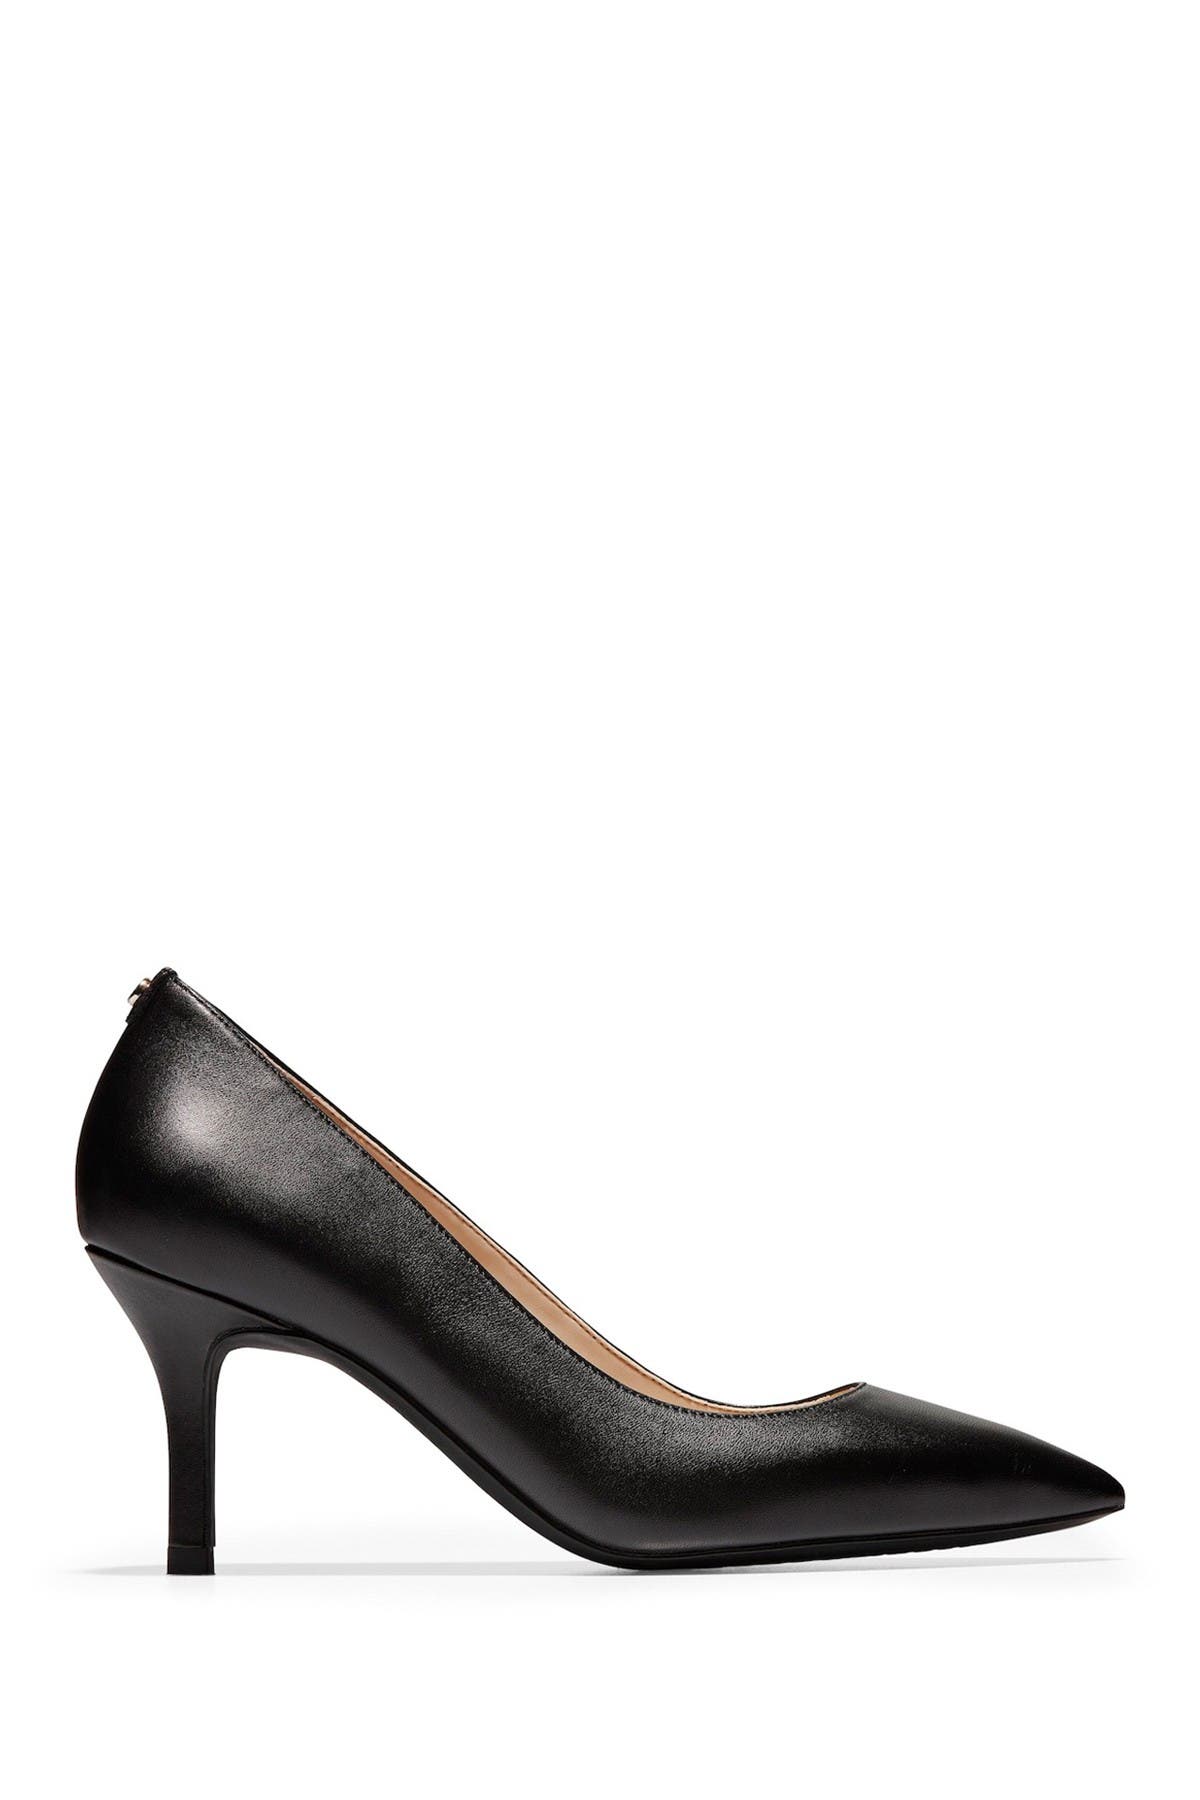 COLE HAAN THE GO-TO STILETTO PUMP,192004726199